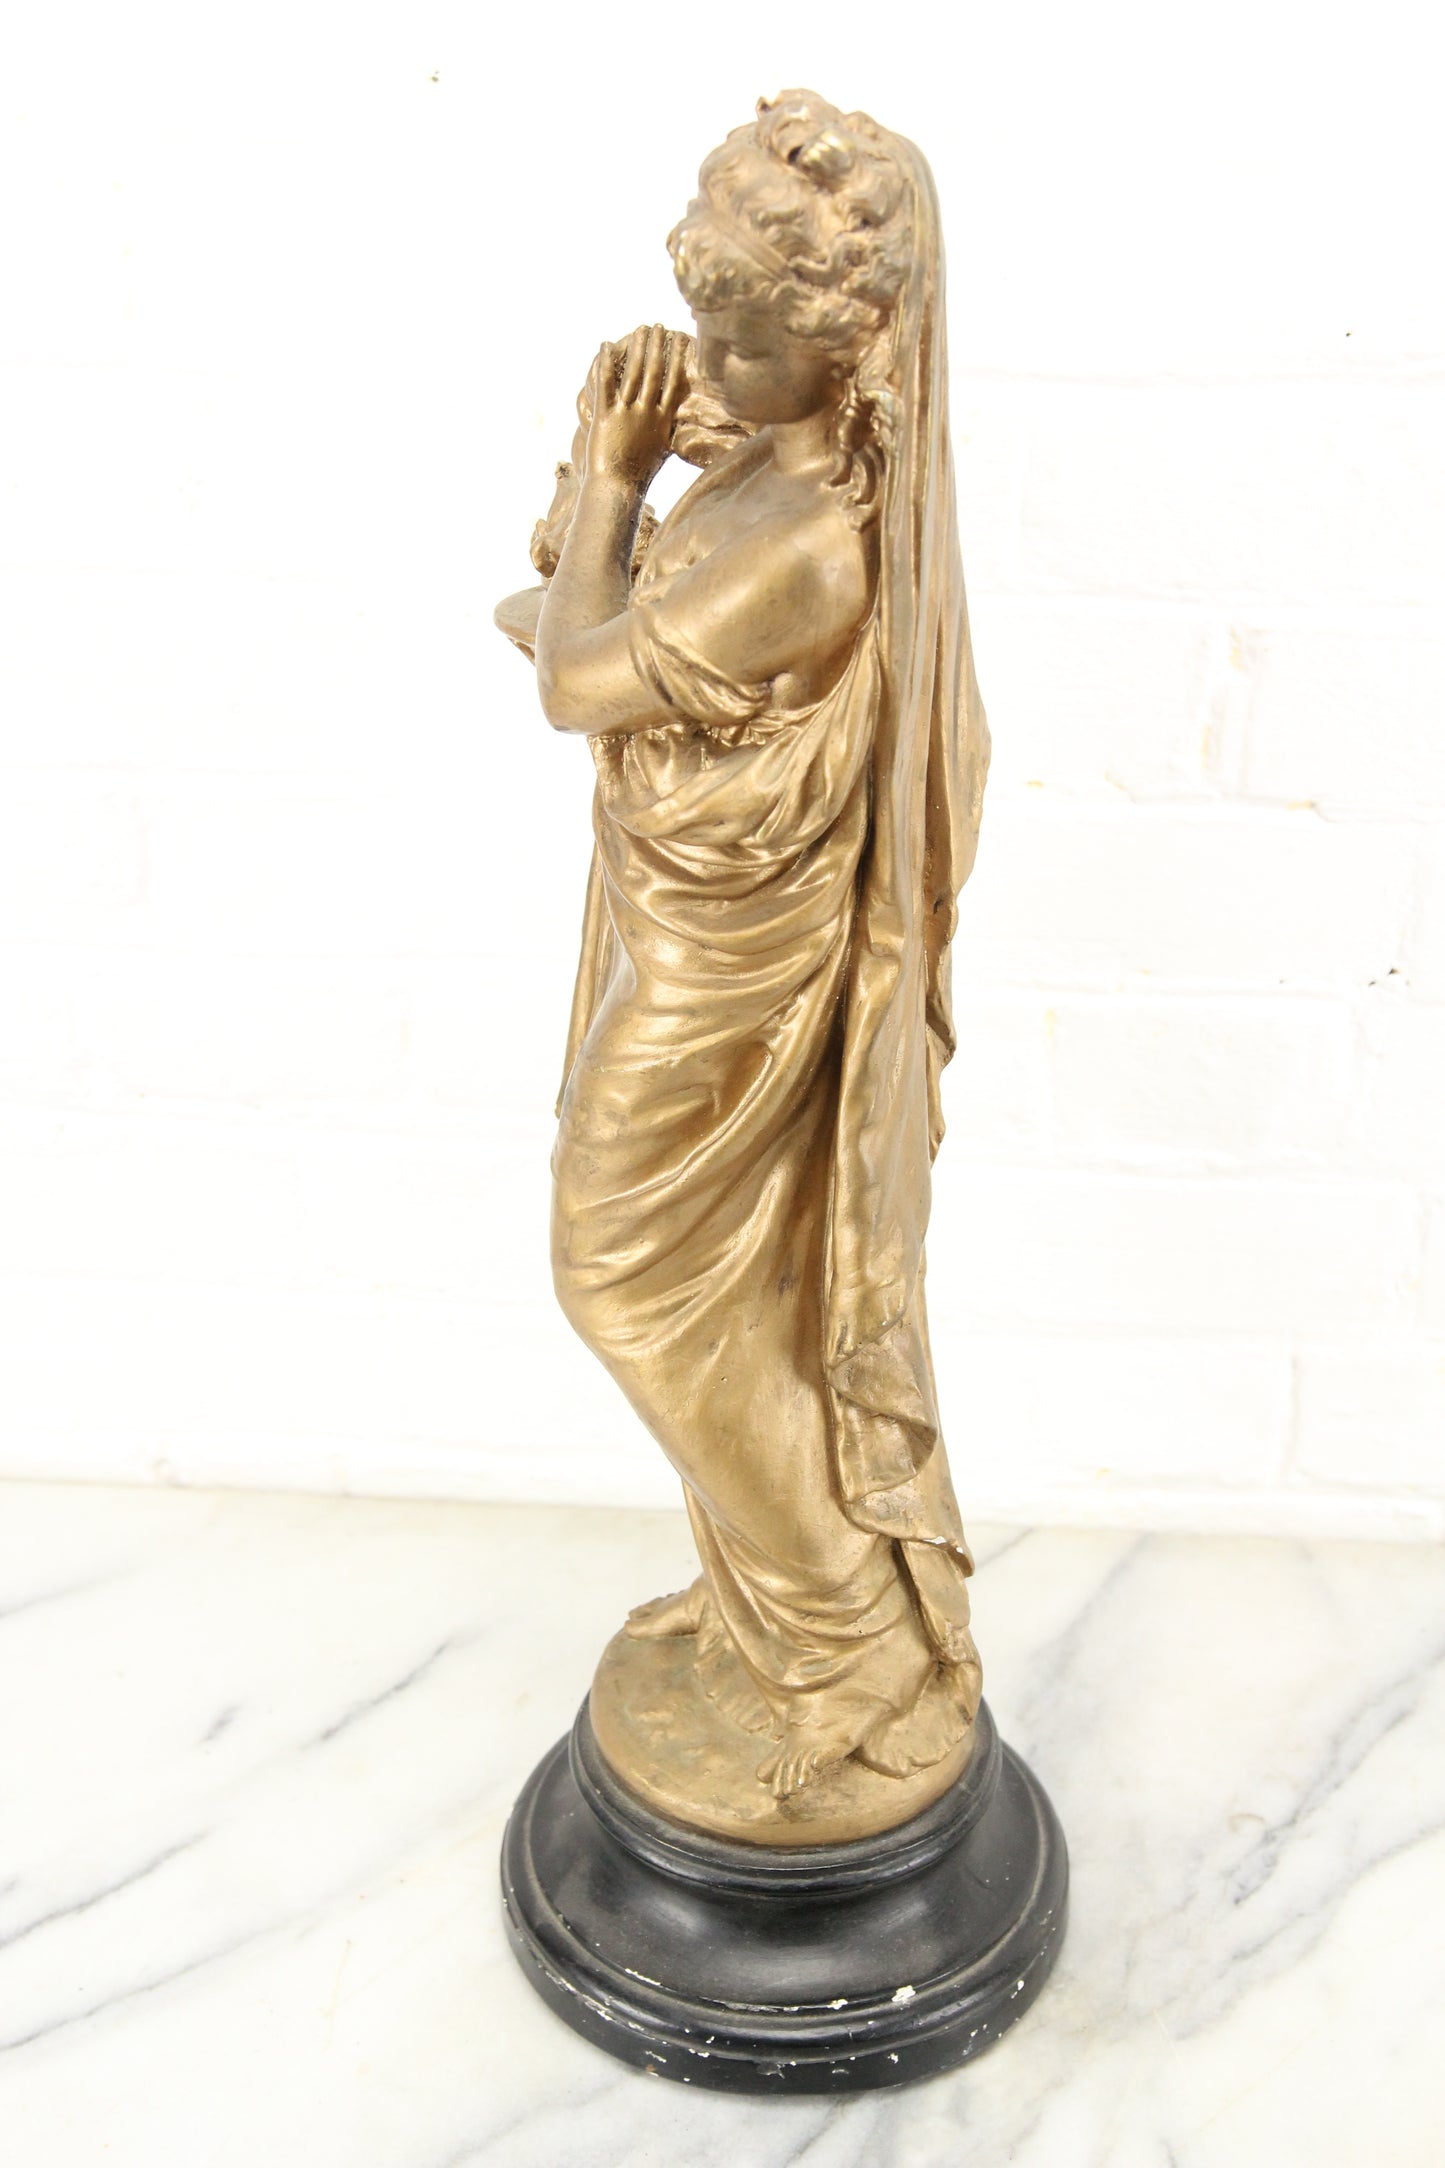 Golden Chalkware Statue of a Woman in Flowing Robes by Marwal Industries Inc.